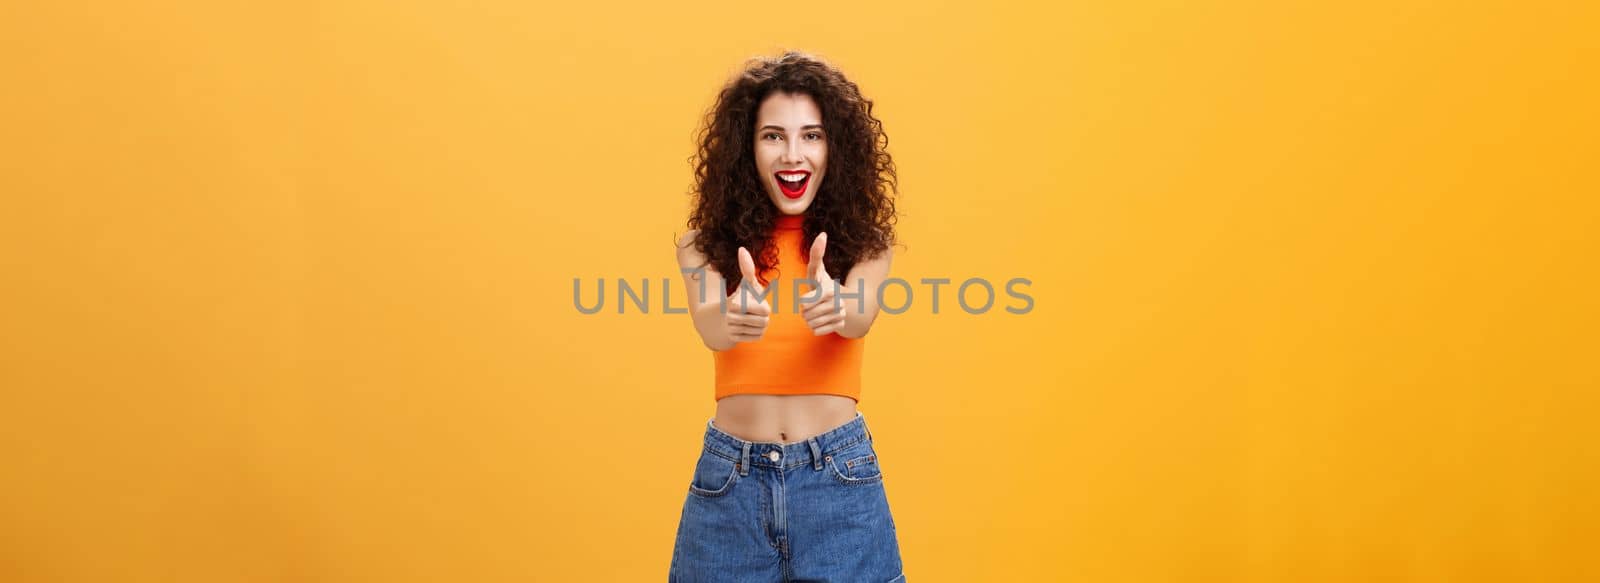 Charismatic ambitious and outgoing charming caucasian. woman with curly hairstyle and red lipstick showing thumbs up gesture in like or approval smiling joyfully being supportive over orange wall.